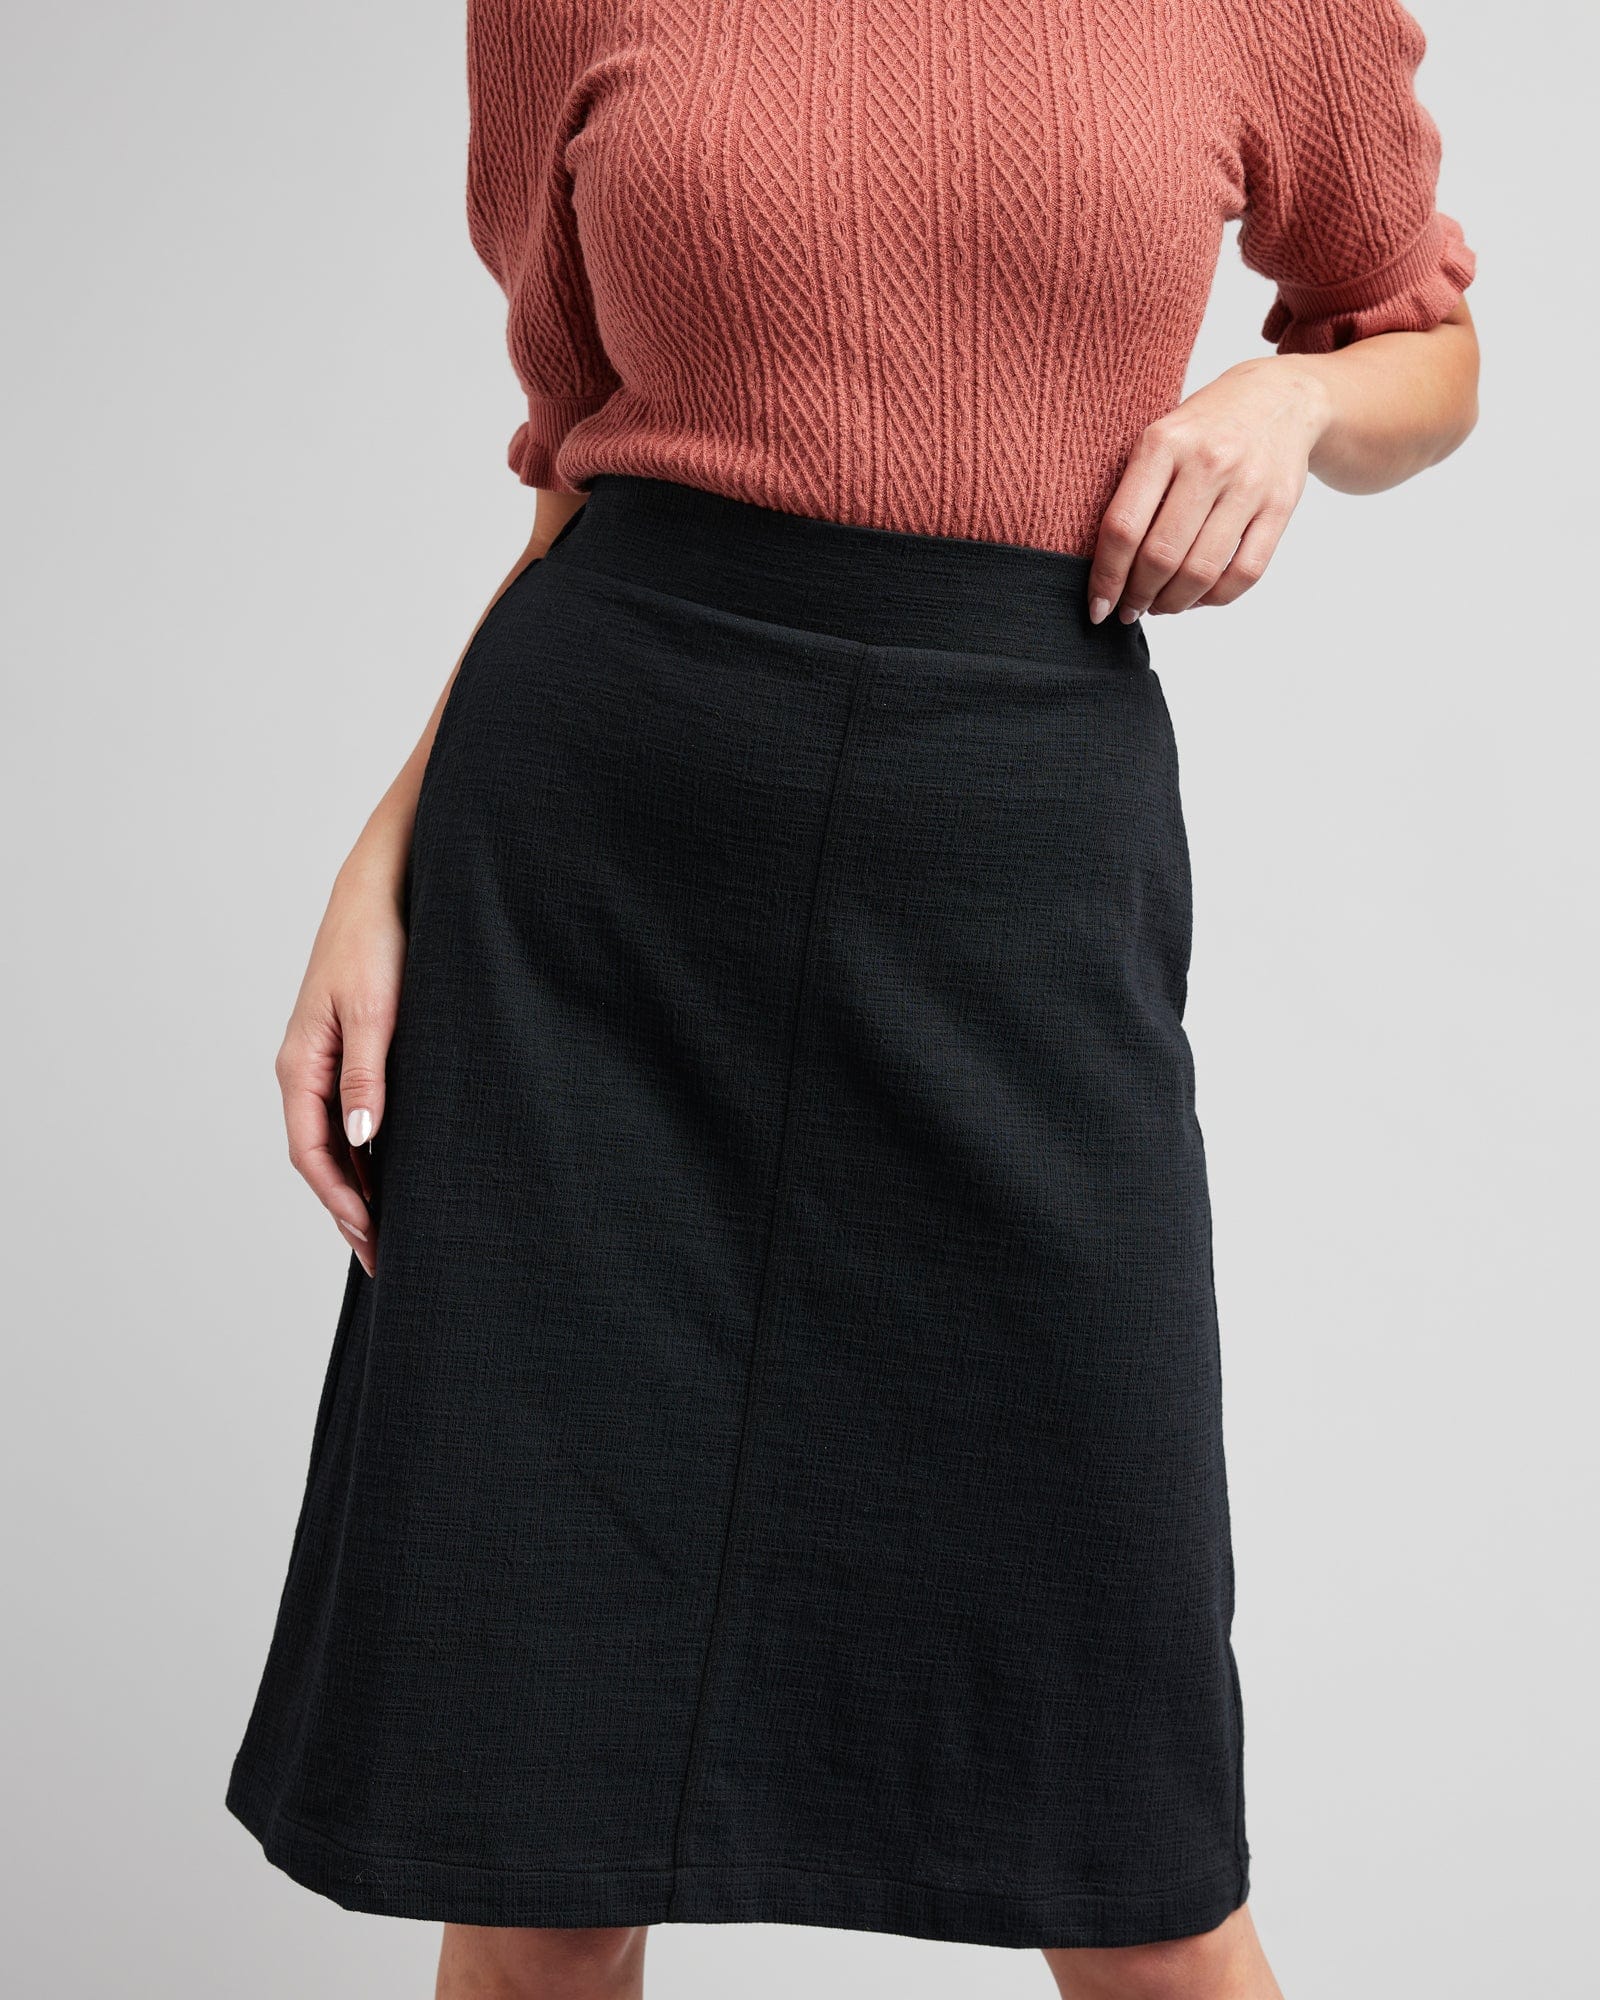 Woman in a black, knee-length pencil skirt